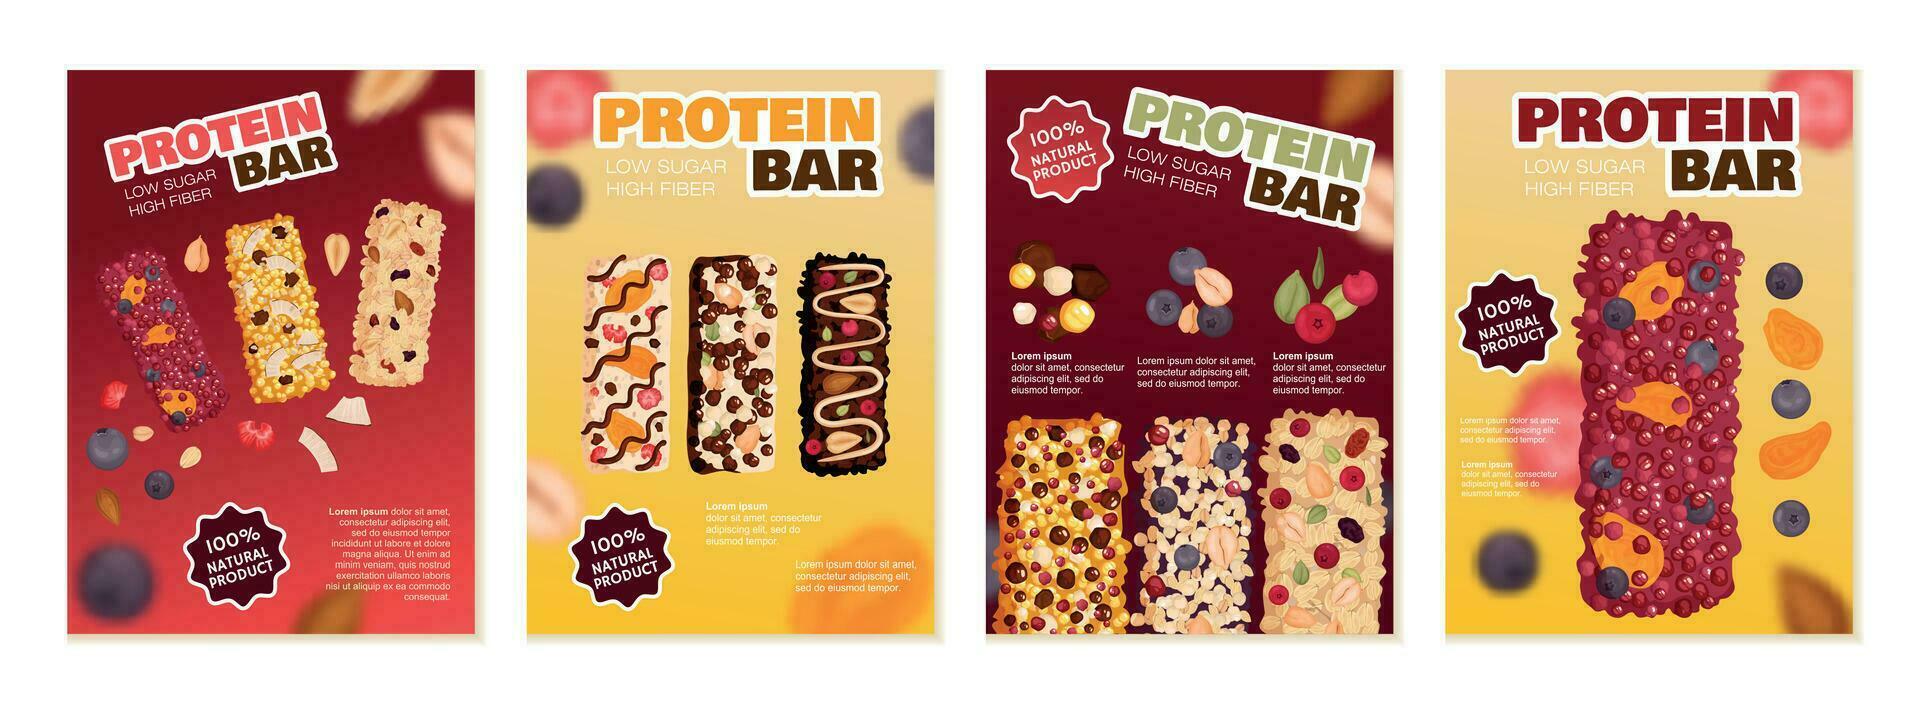 Healthy Protein Bar Poster Set vector